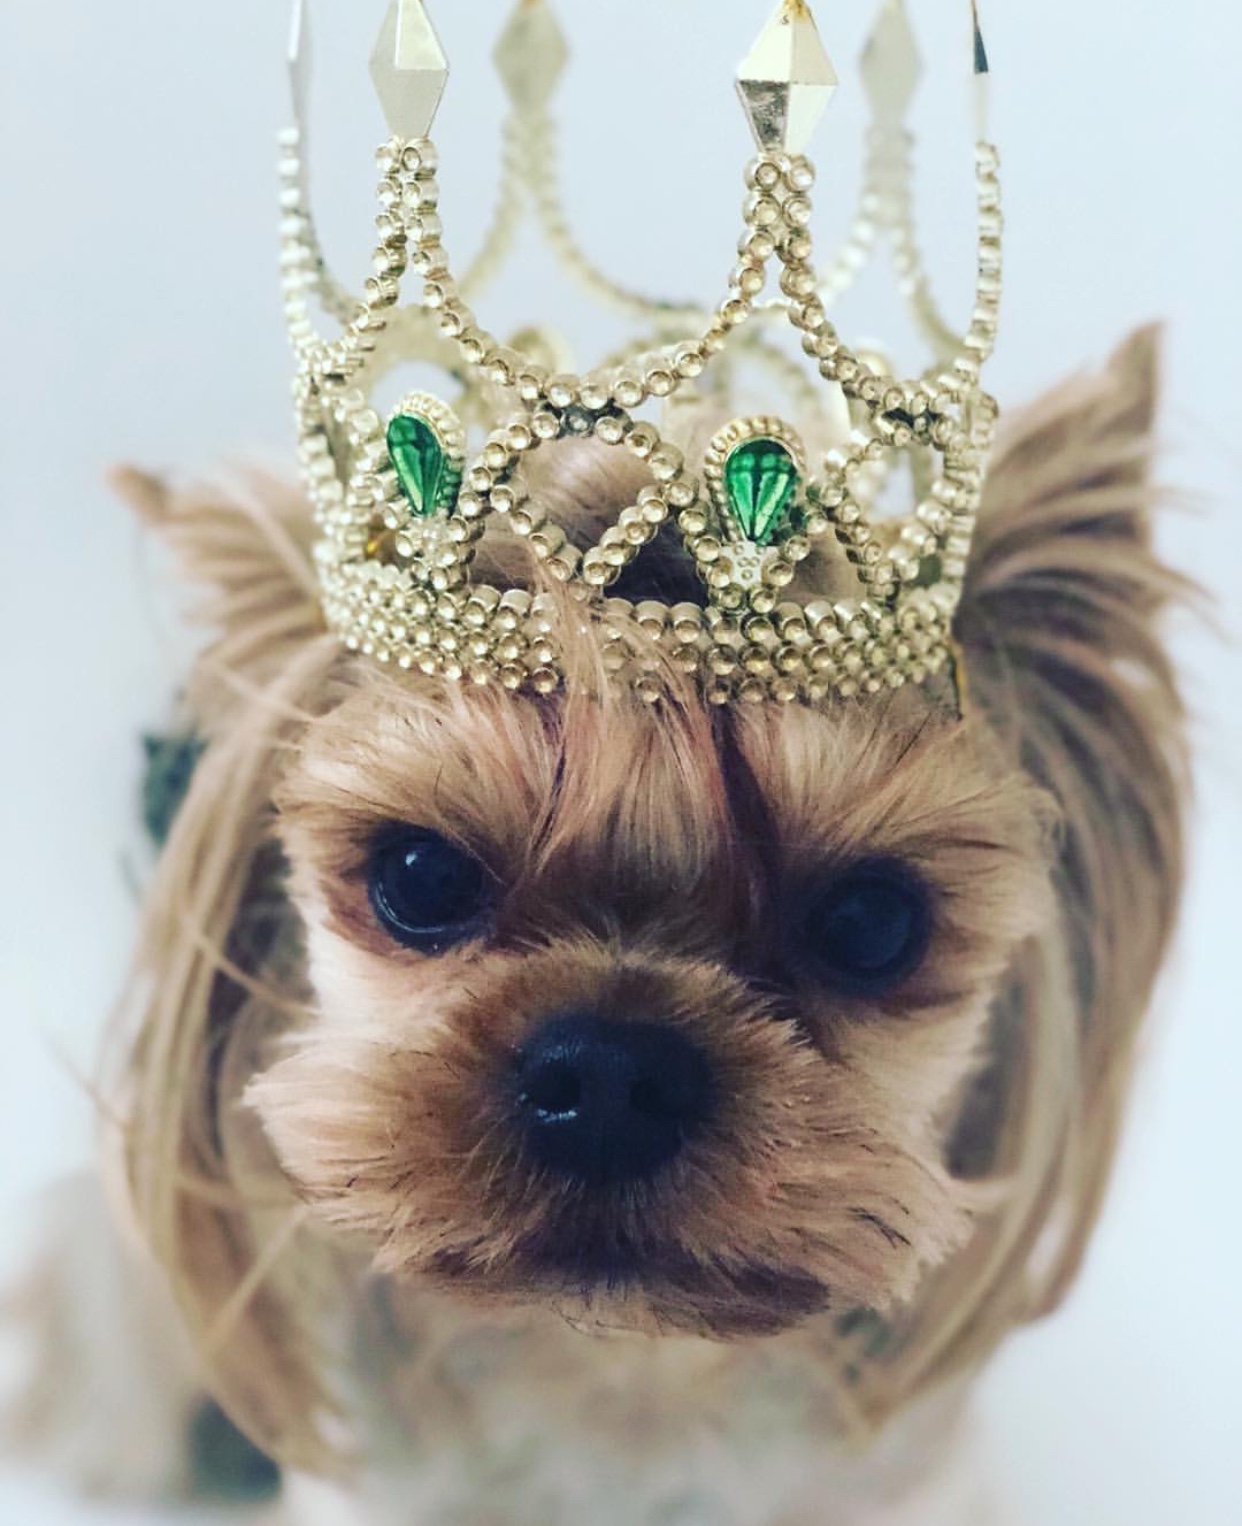 A Yorkshire Terrier sitting snow while wearing a crown with green gems